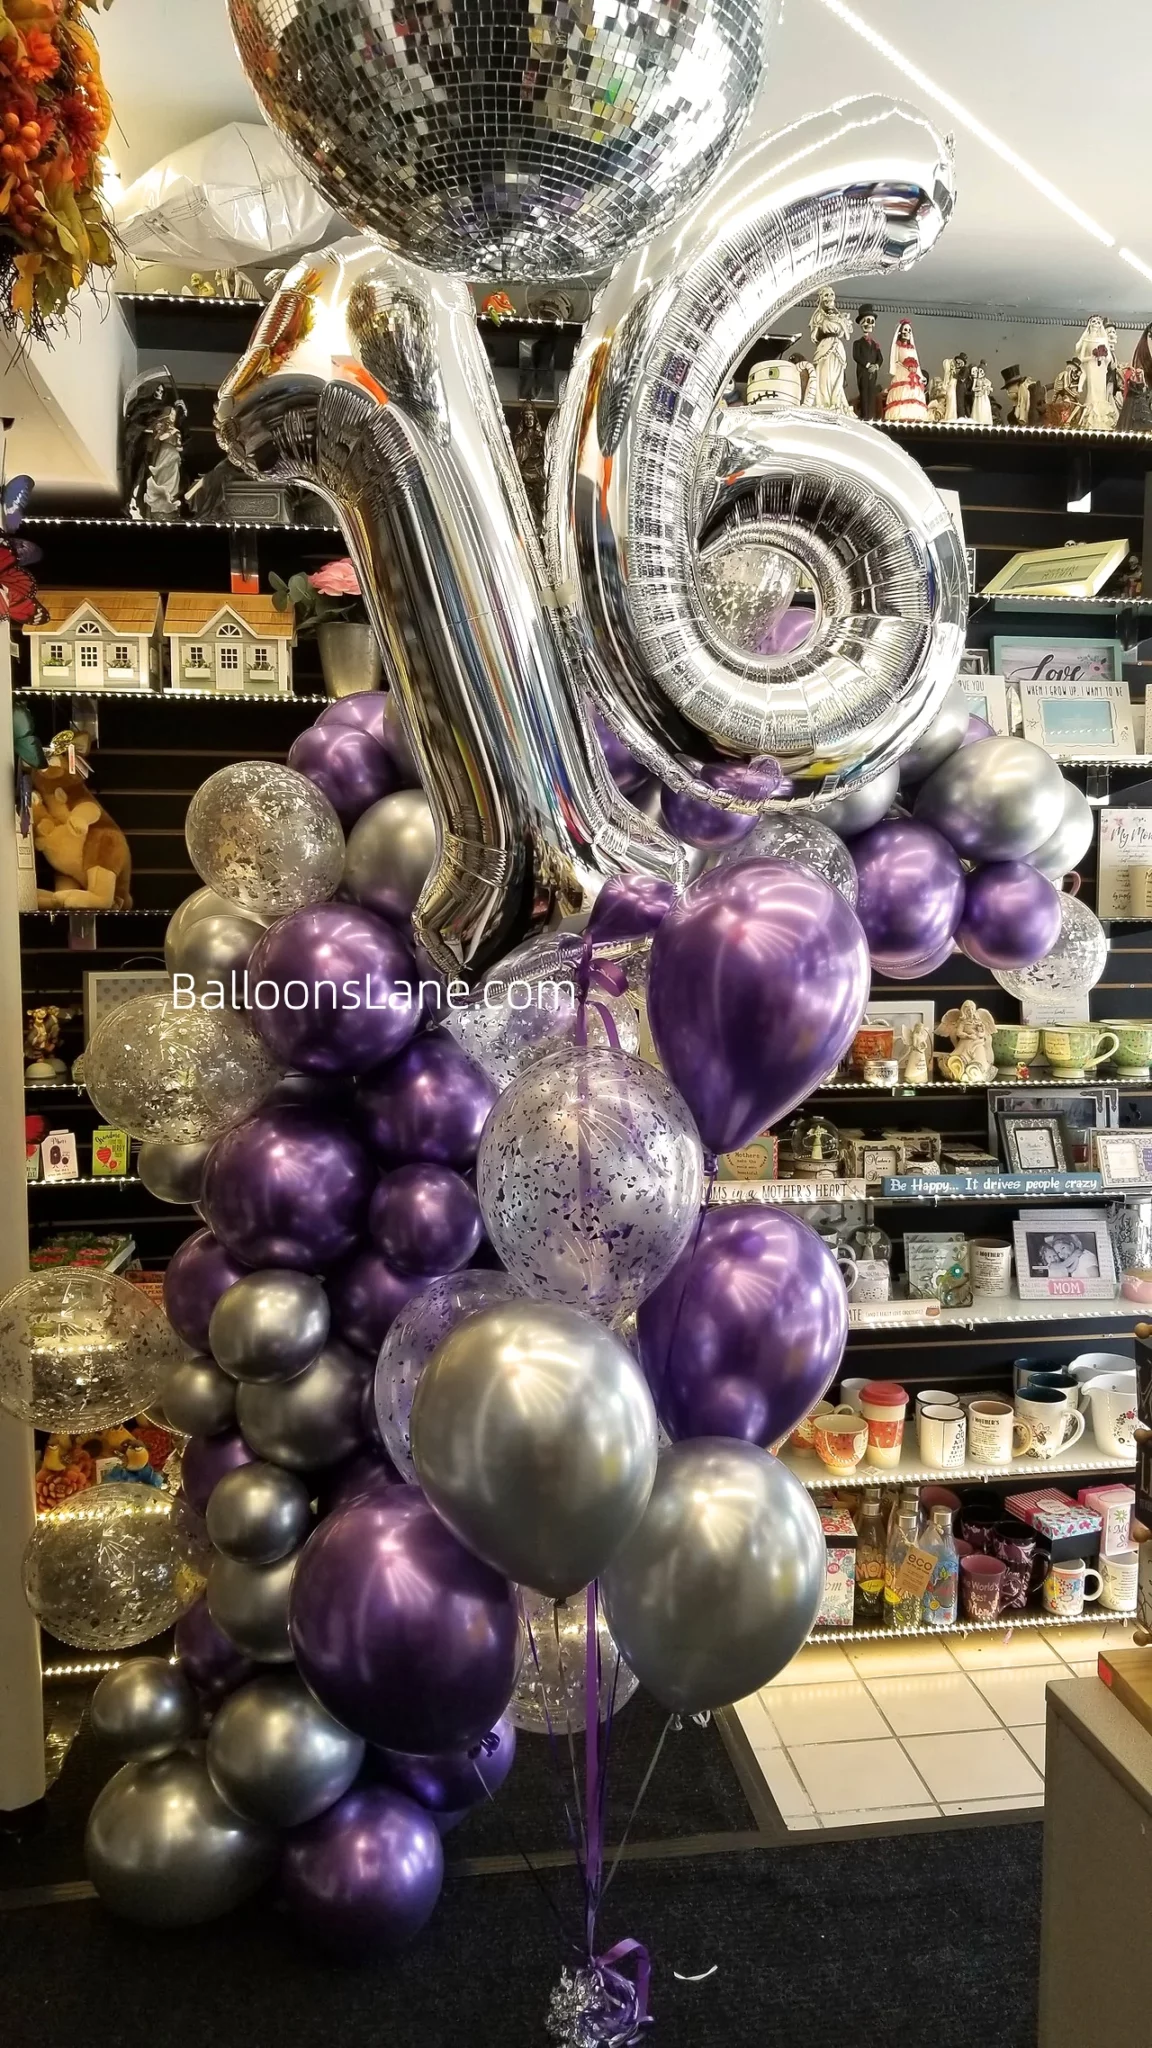 A bouquet arrangement featuring lavender balloons, silver balloons, and confetti balloons, along with number 1 & 6 balloons.